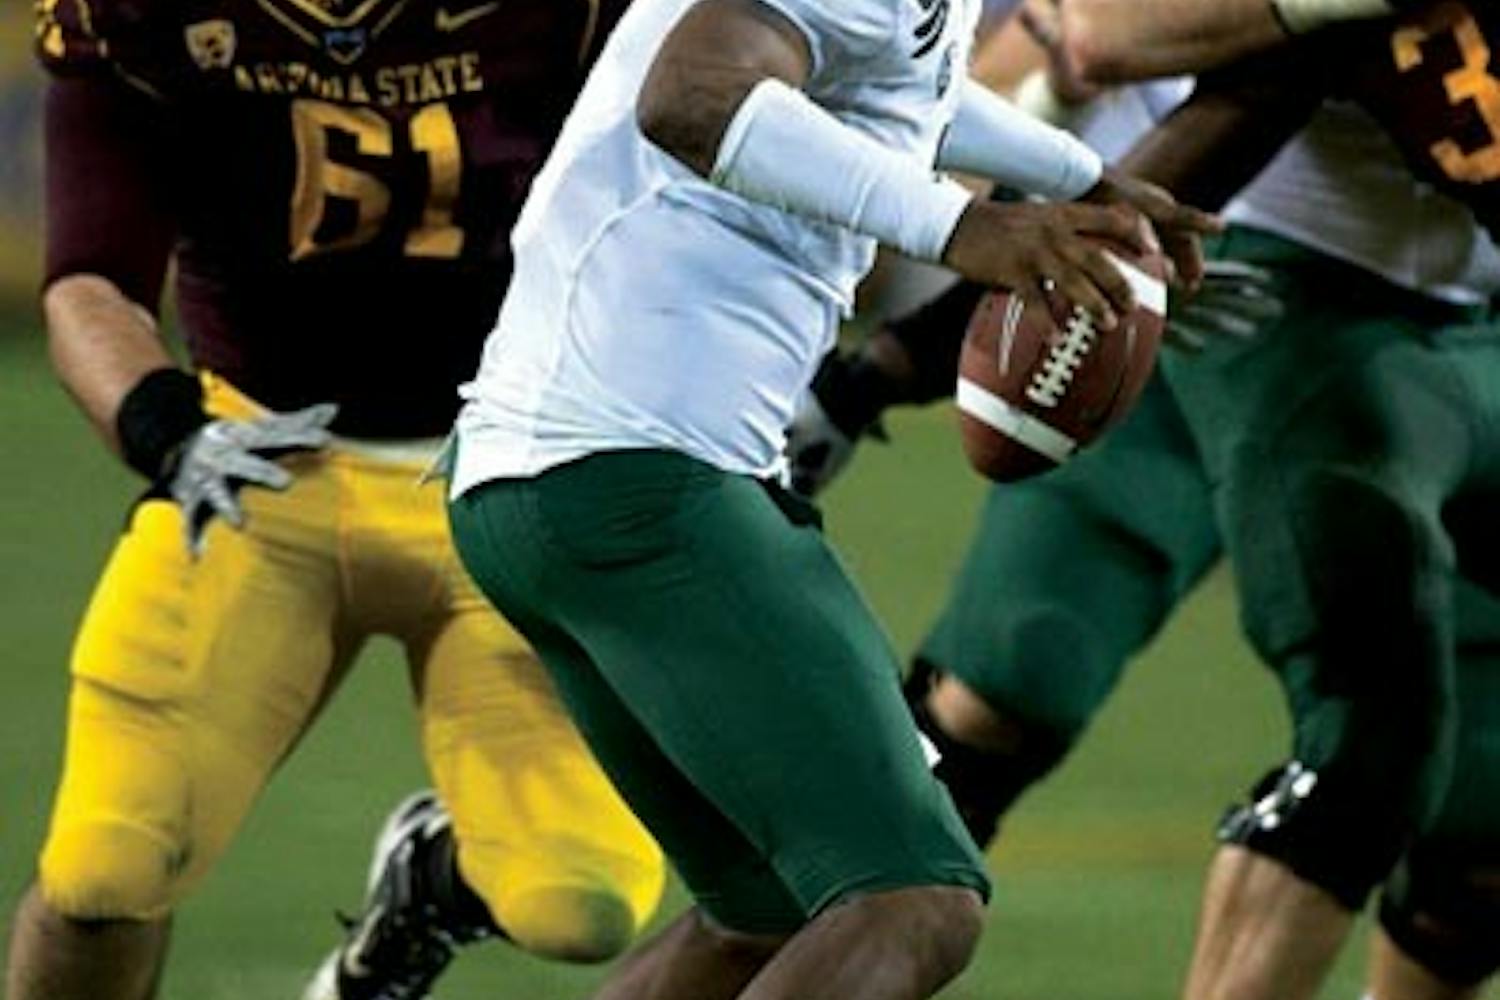 HIGH EXPECTATIONS: Oregon sophomore quarterback Darron Thomas leads a powerful Ducks offense that may have more speed than any team in the country. With just California, UA and Oregon State left to play, Oregon is widely expected to appear in the BCS National Championship game. (Photo by Aaron Lavinsky)